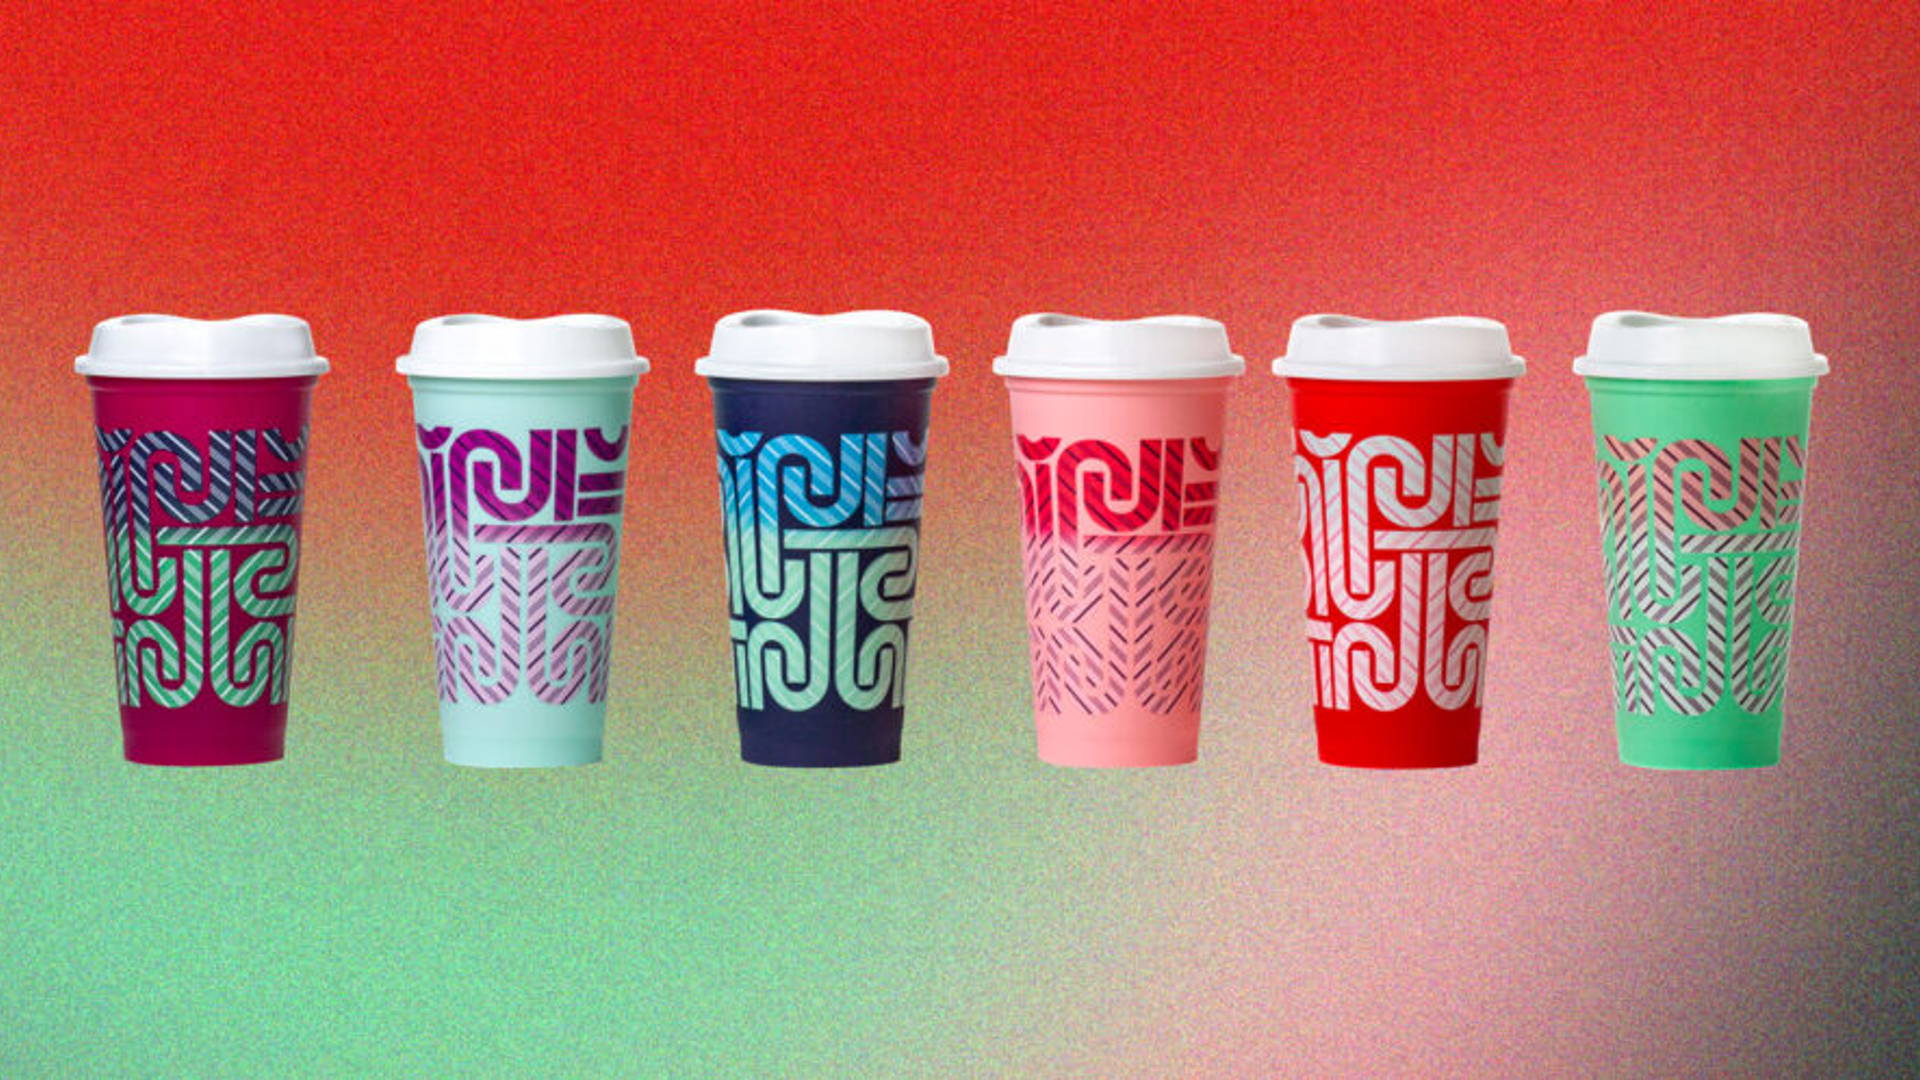 Starbucks' New Reusable Holiday Cups Change Colors  Dieline - Design,  Branding & Packaging Inspiration